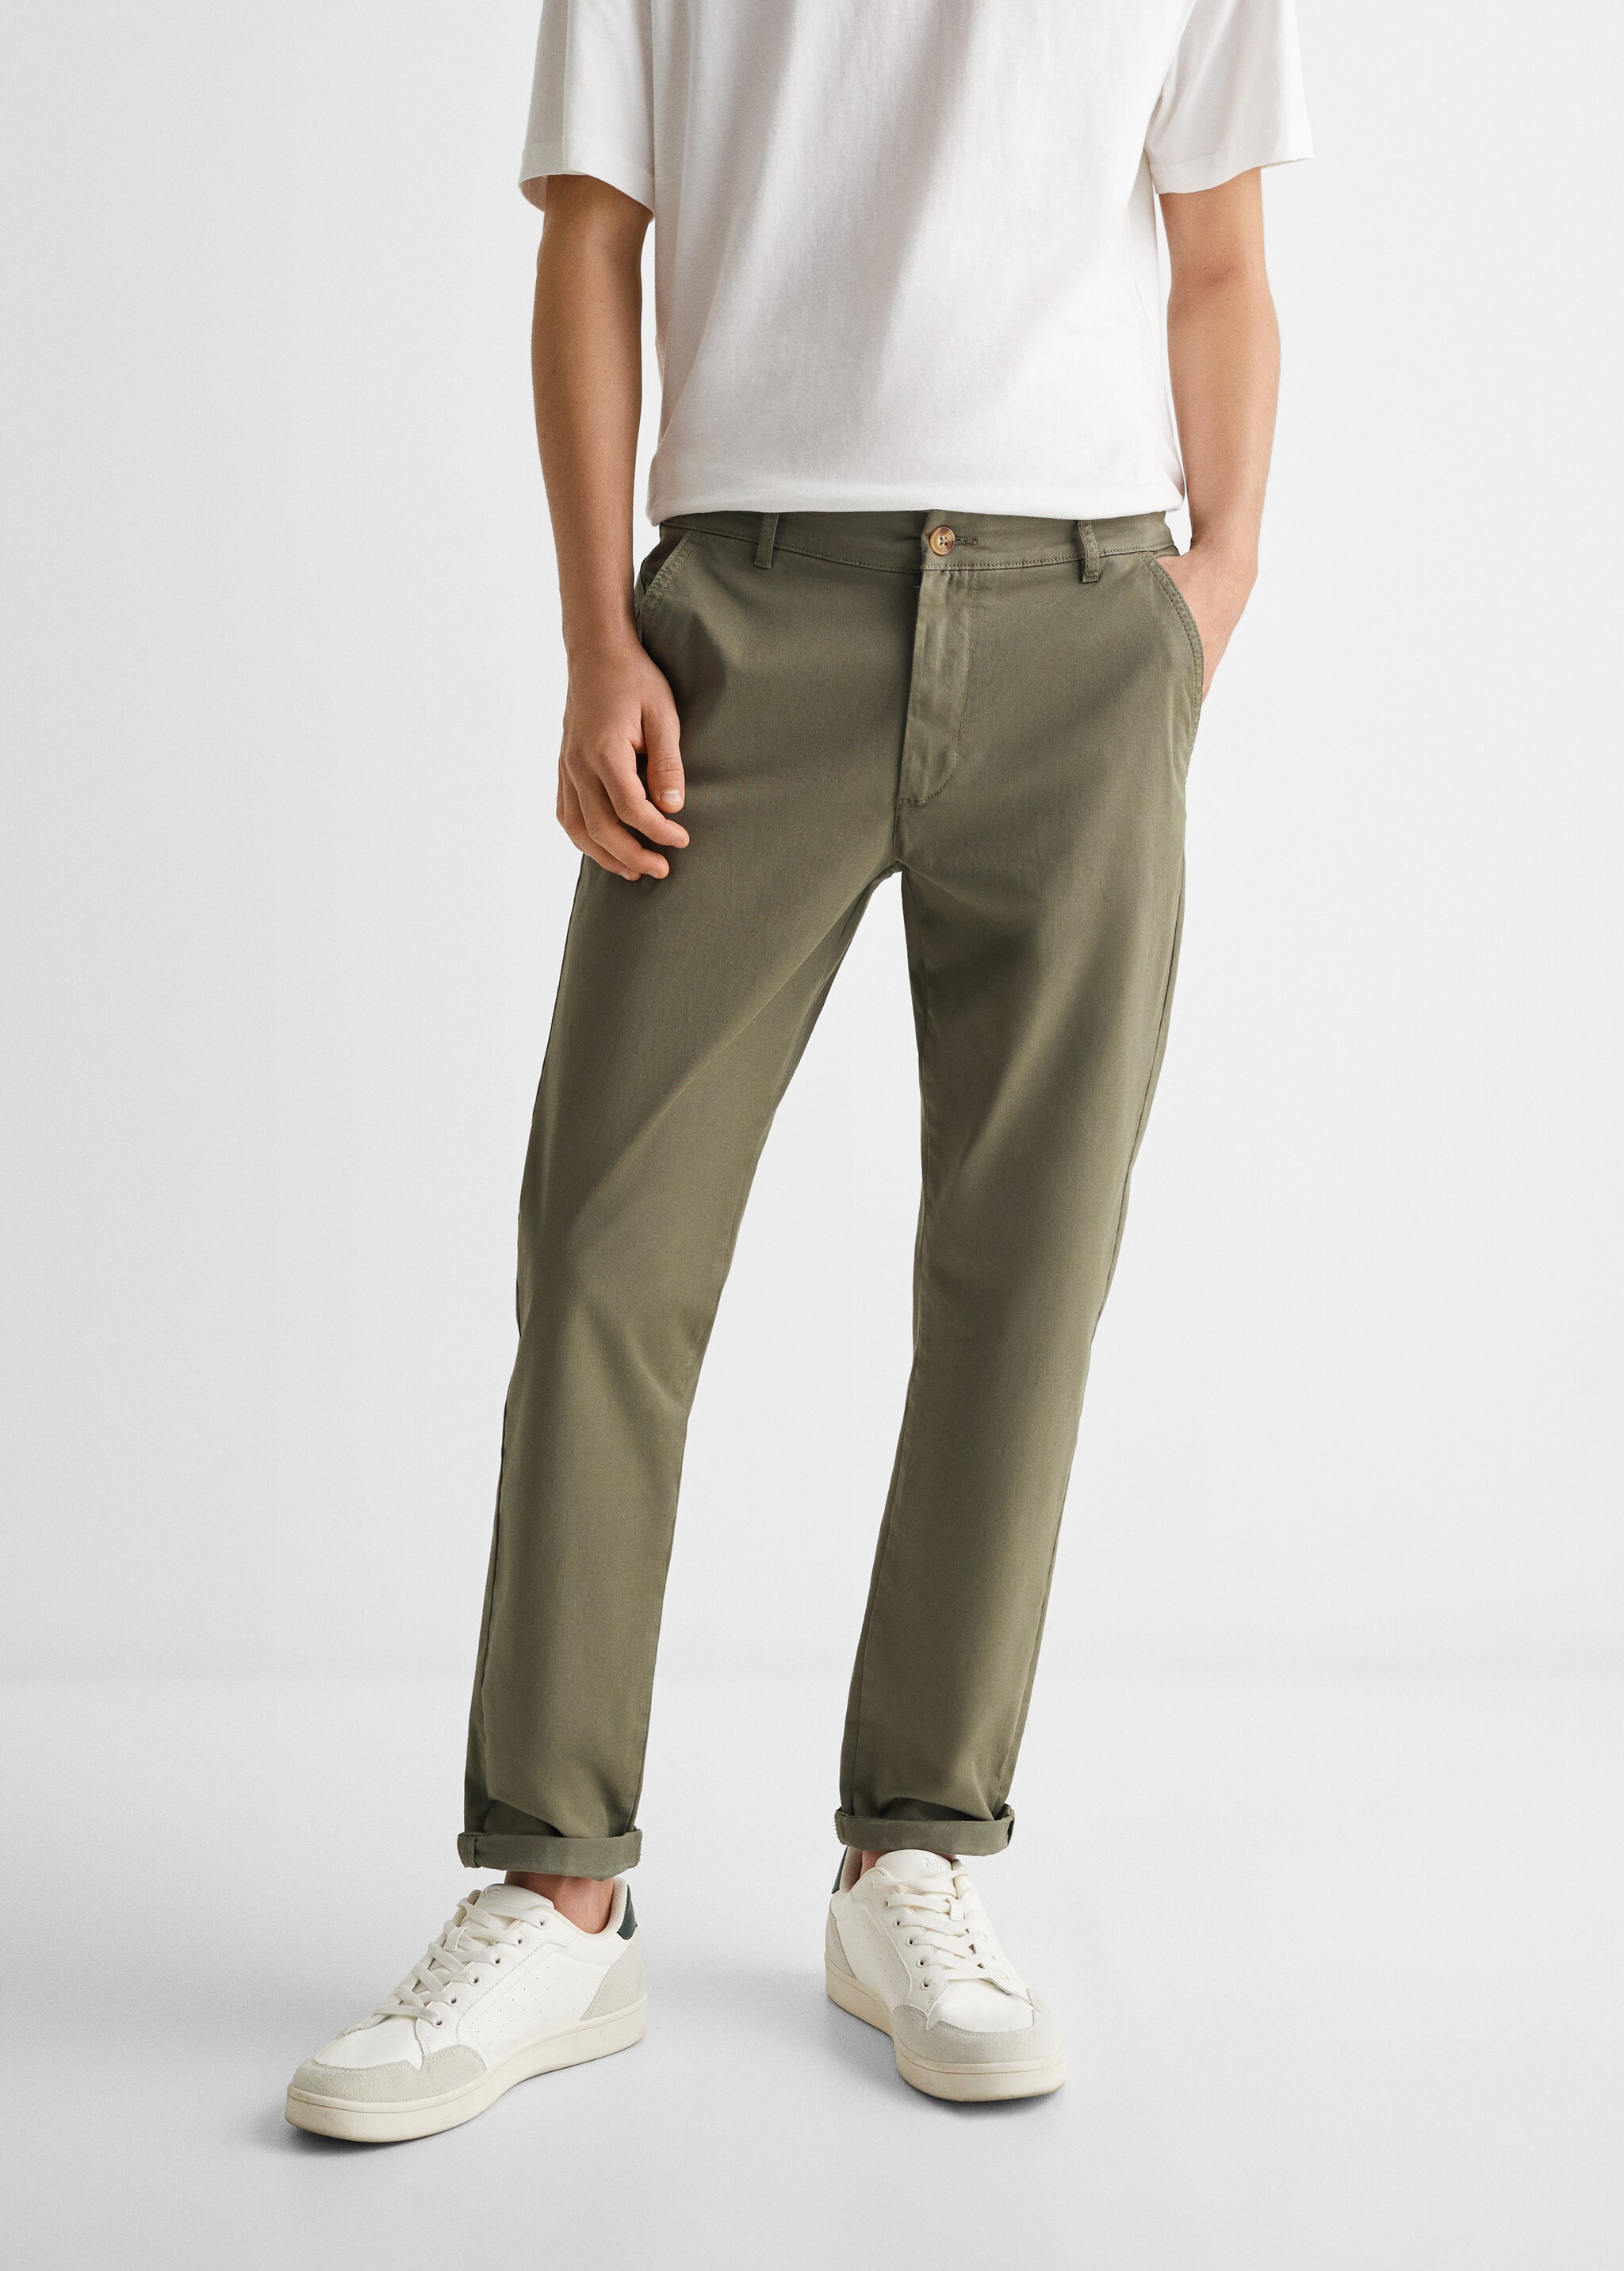 Cotton chinos - Details of the article 6